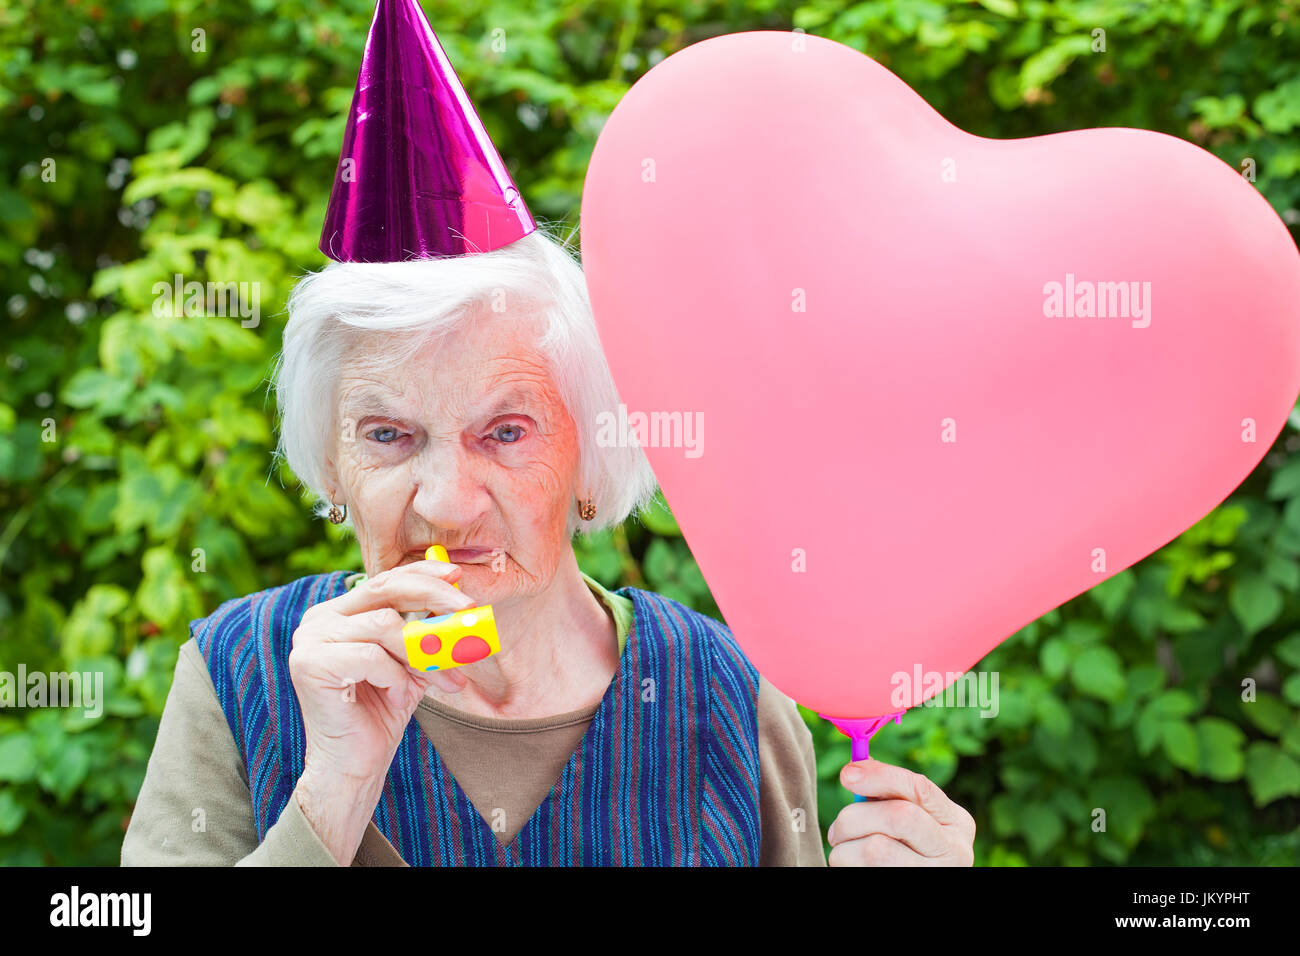 Picture of a happy elderly woman celebrating birthday holding a heart shaped balloon an blowing a whistle outdoor Stock Photo